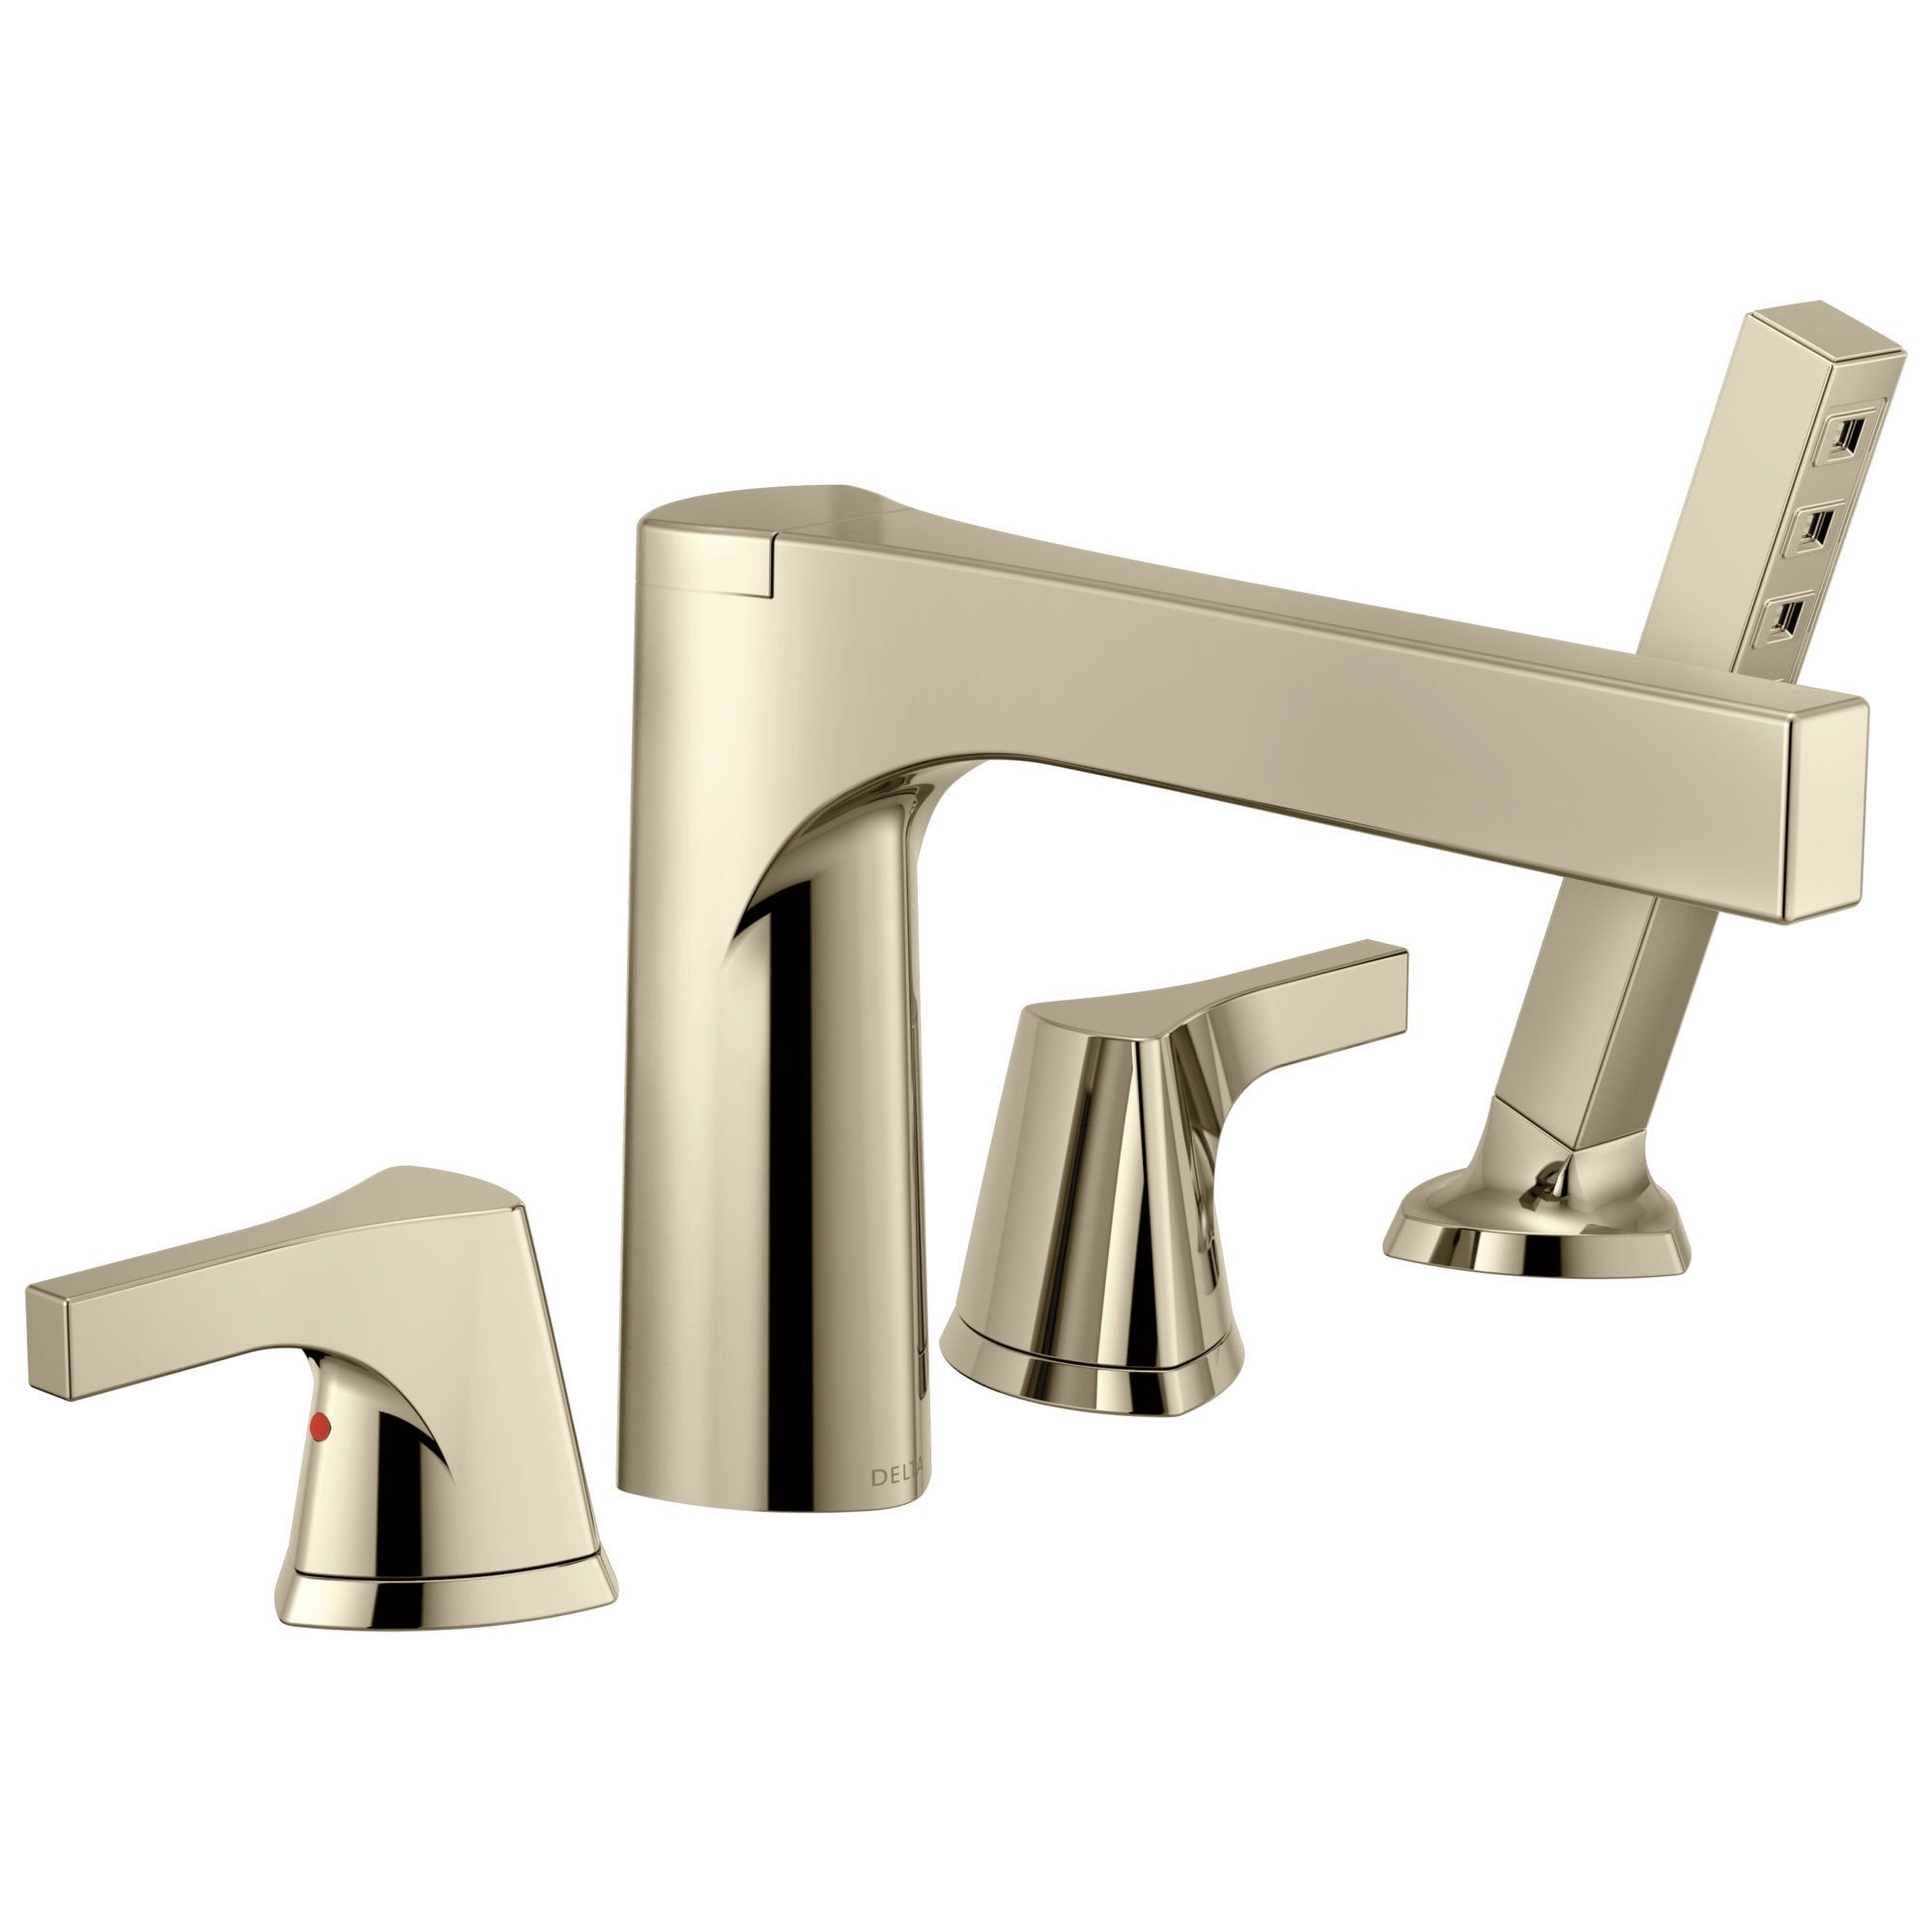 Delta Zura Collection Polished Nickel Contemporary 4-Hole Deck Mounted Roman Tub Filler Faucet with Handheld Shower Trim Kit (Requires Valve) DT4774PN